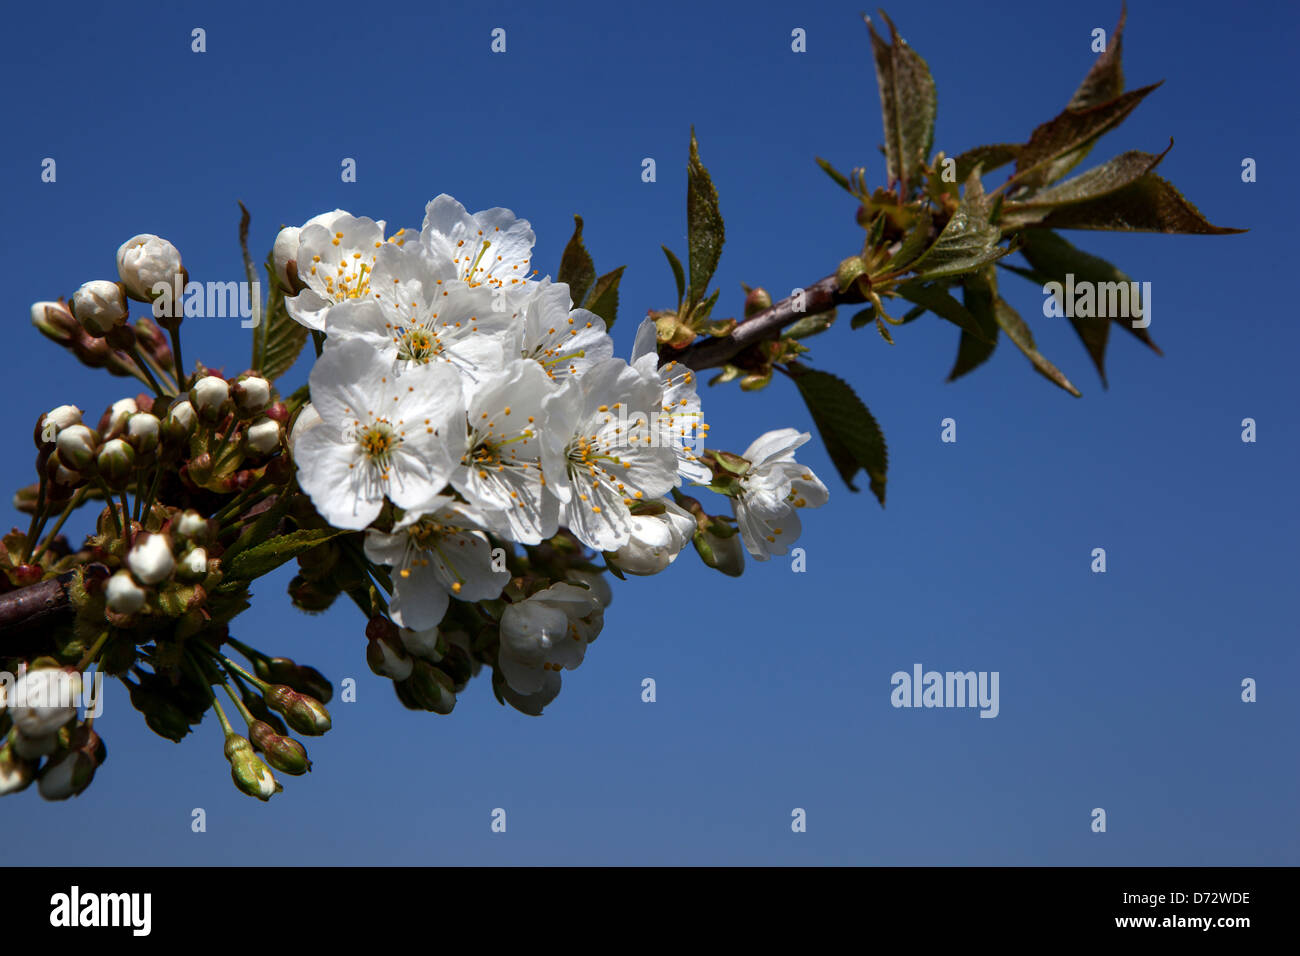 Close Up of Blossoms on a branch in Early Spring Blossoming flower on tree Stock Photo